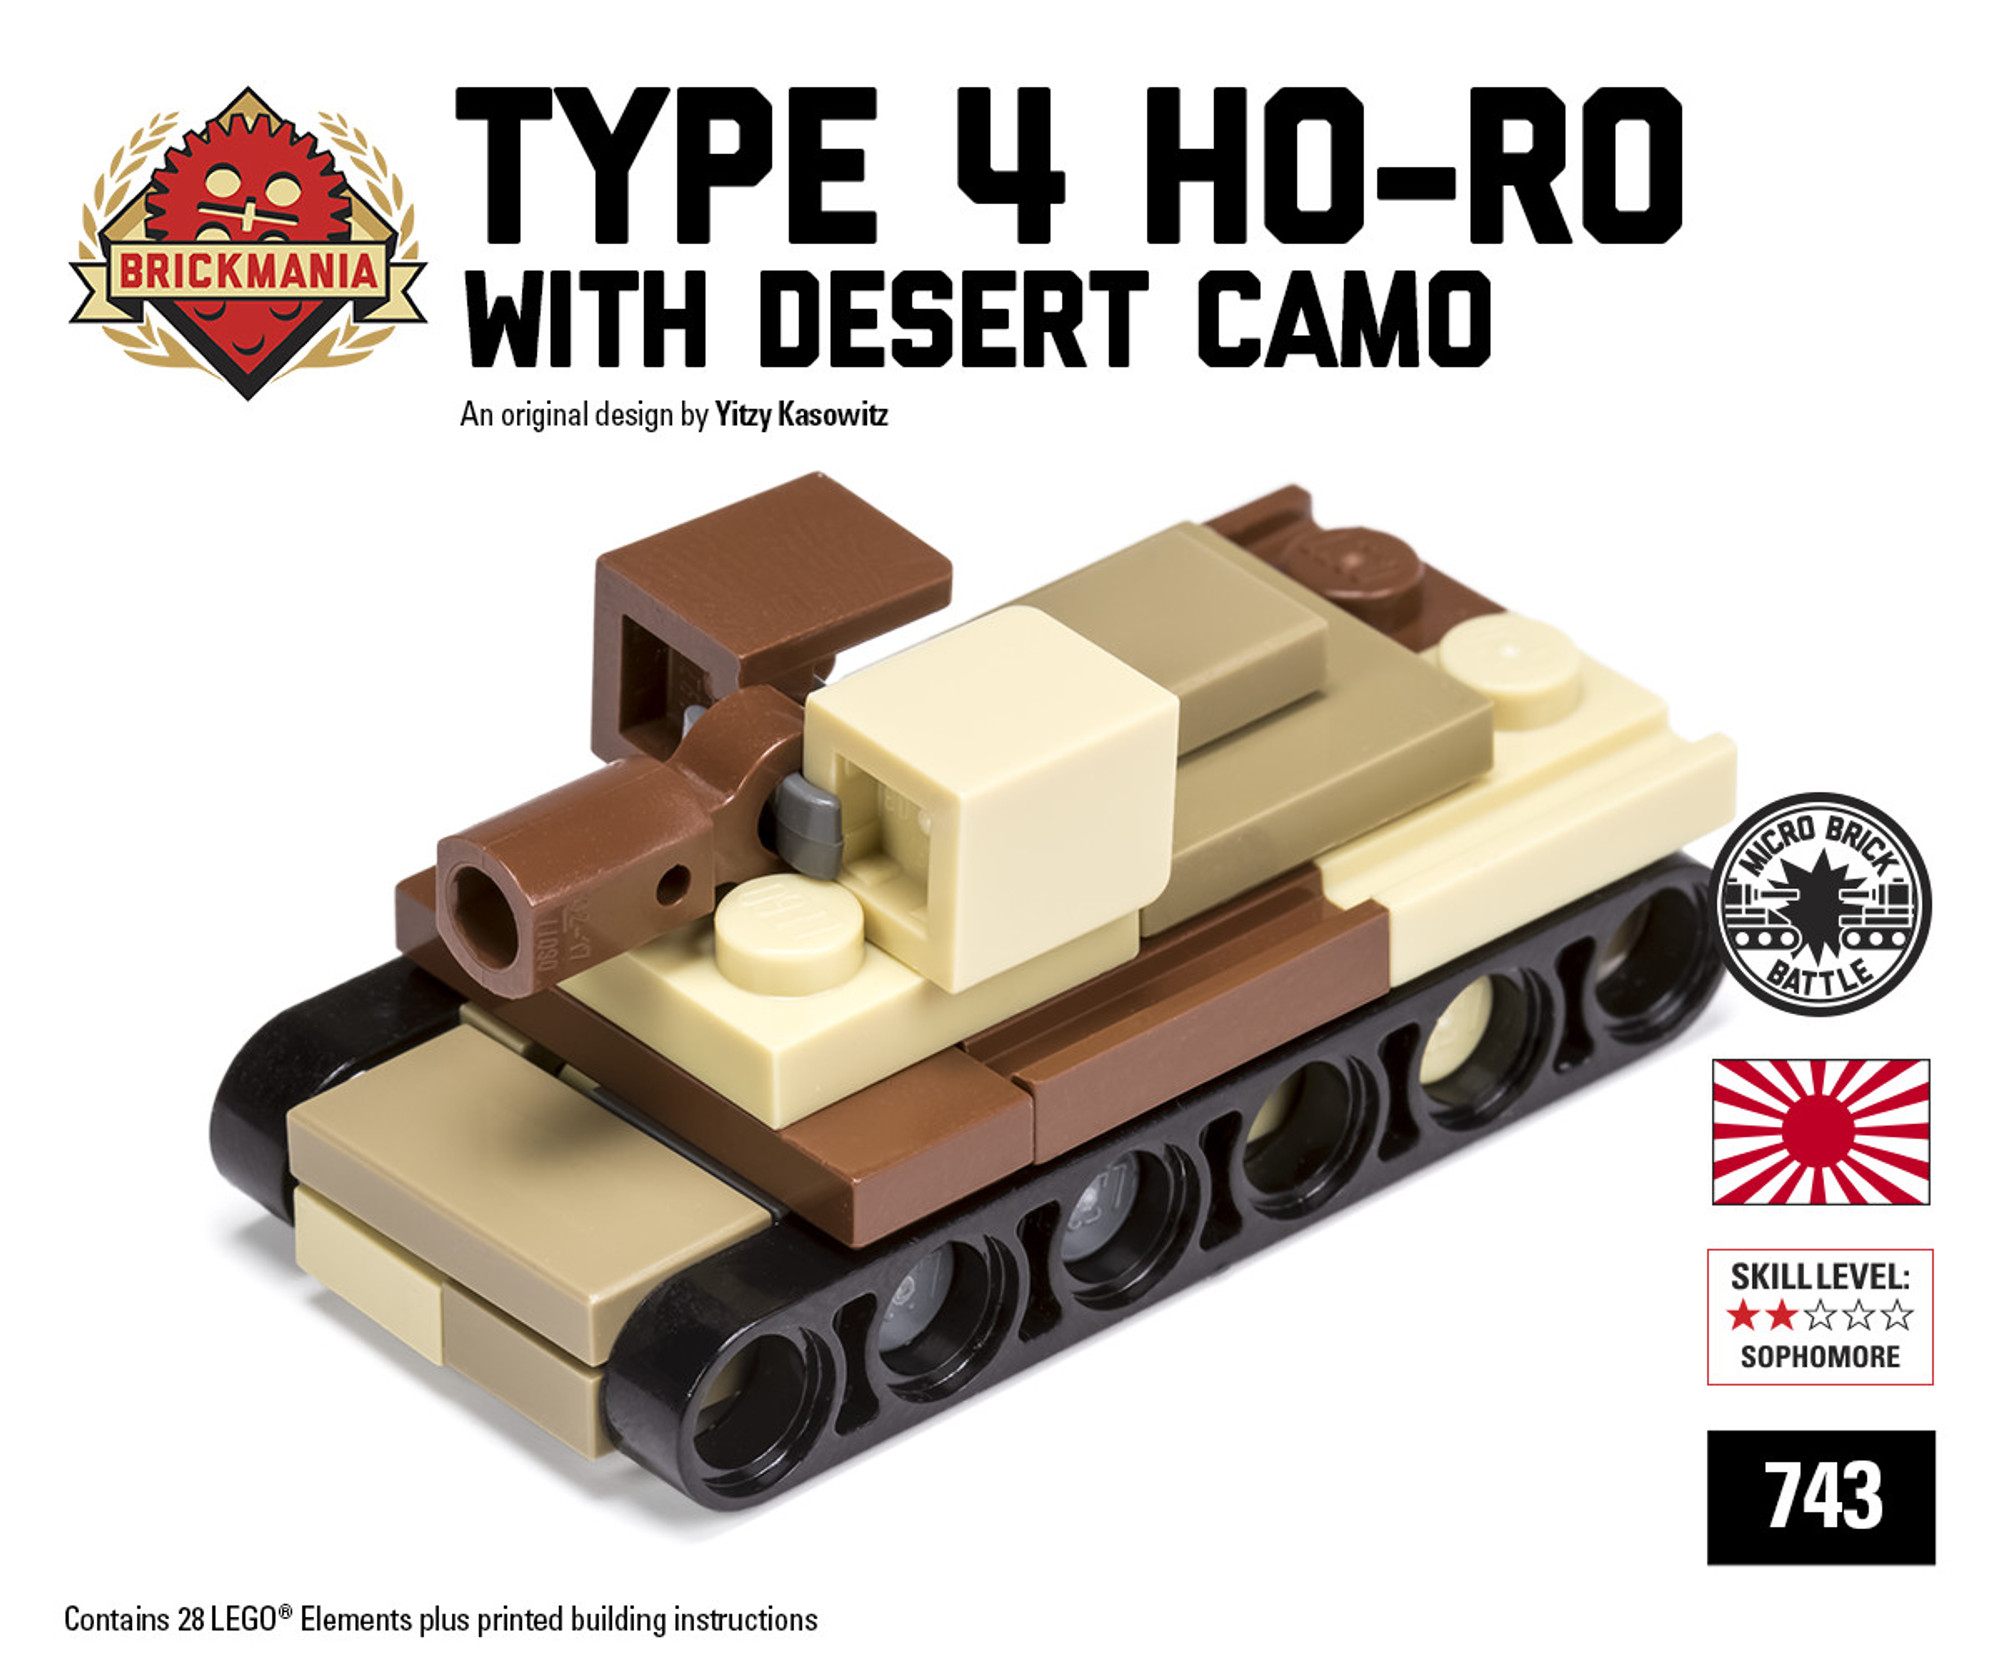 Brickmania Toys on X: The Panzer IV Micro-tank is available to order  through our website! This is designed for our Micro Brick Battle game    / X